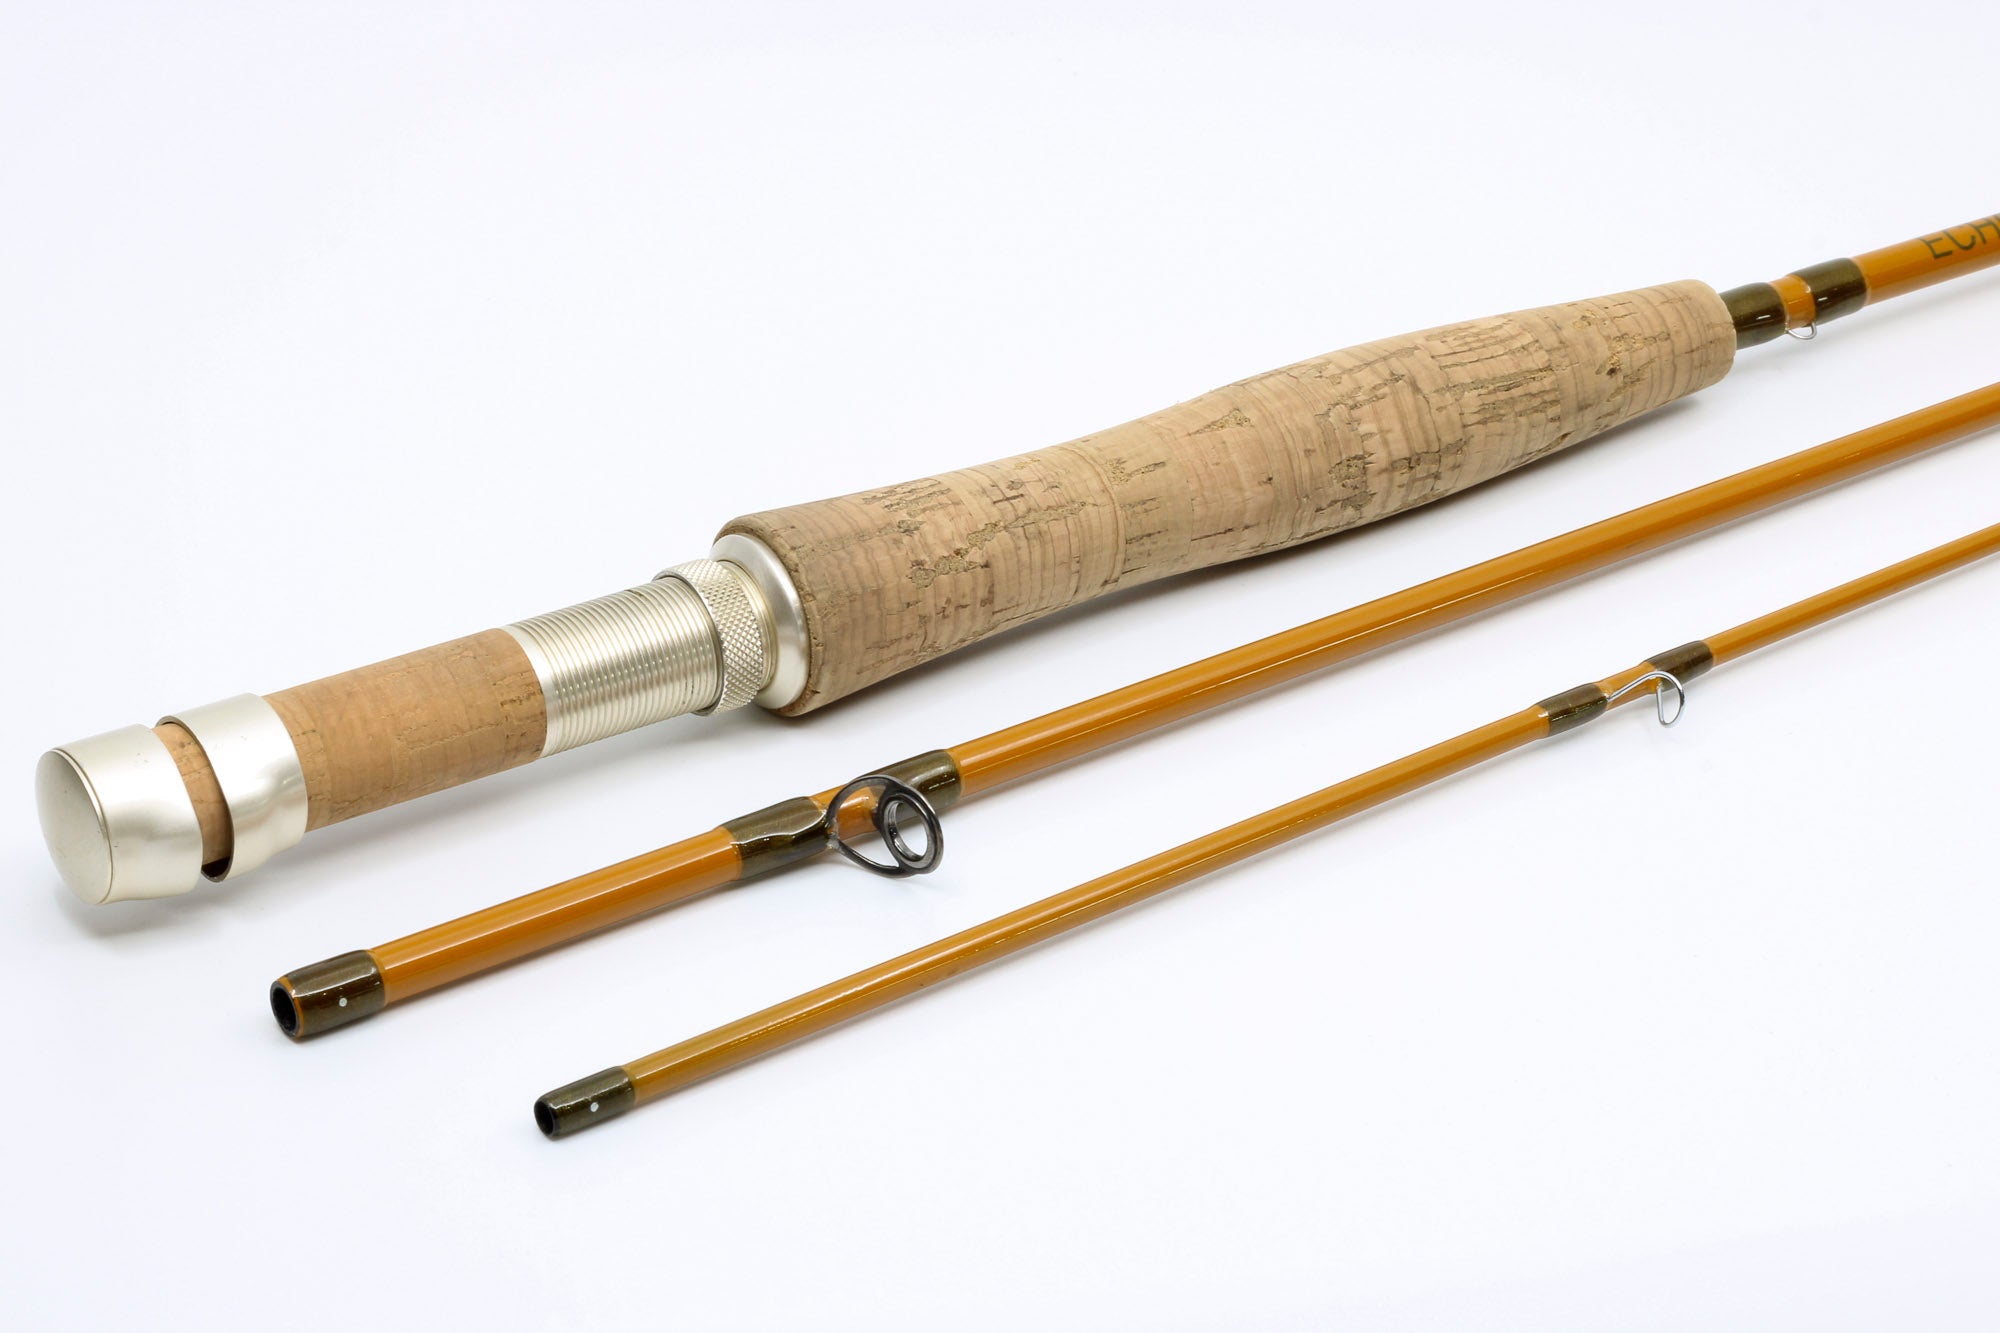 VINTAGE 3 PIECE FLY FISHING ROD - UNBRANDED